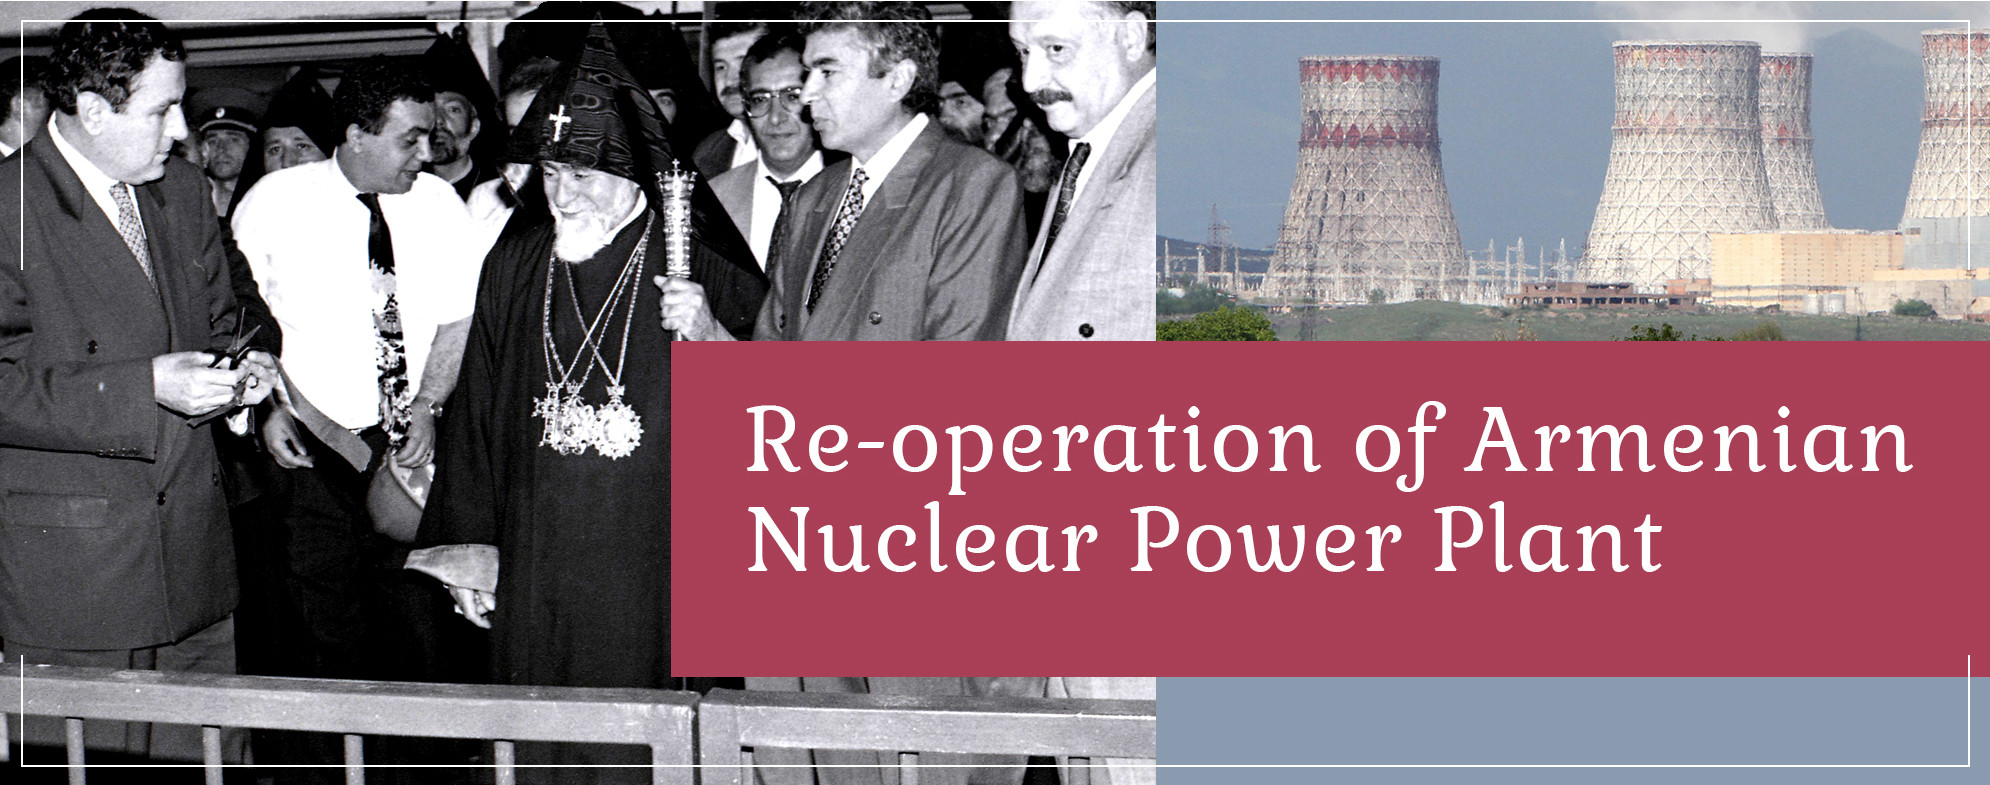 Re-operation of Armenian Nuclear Power Plant